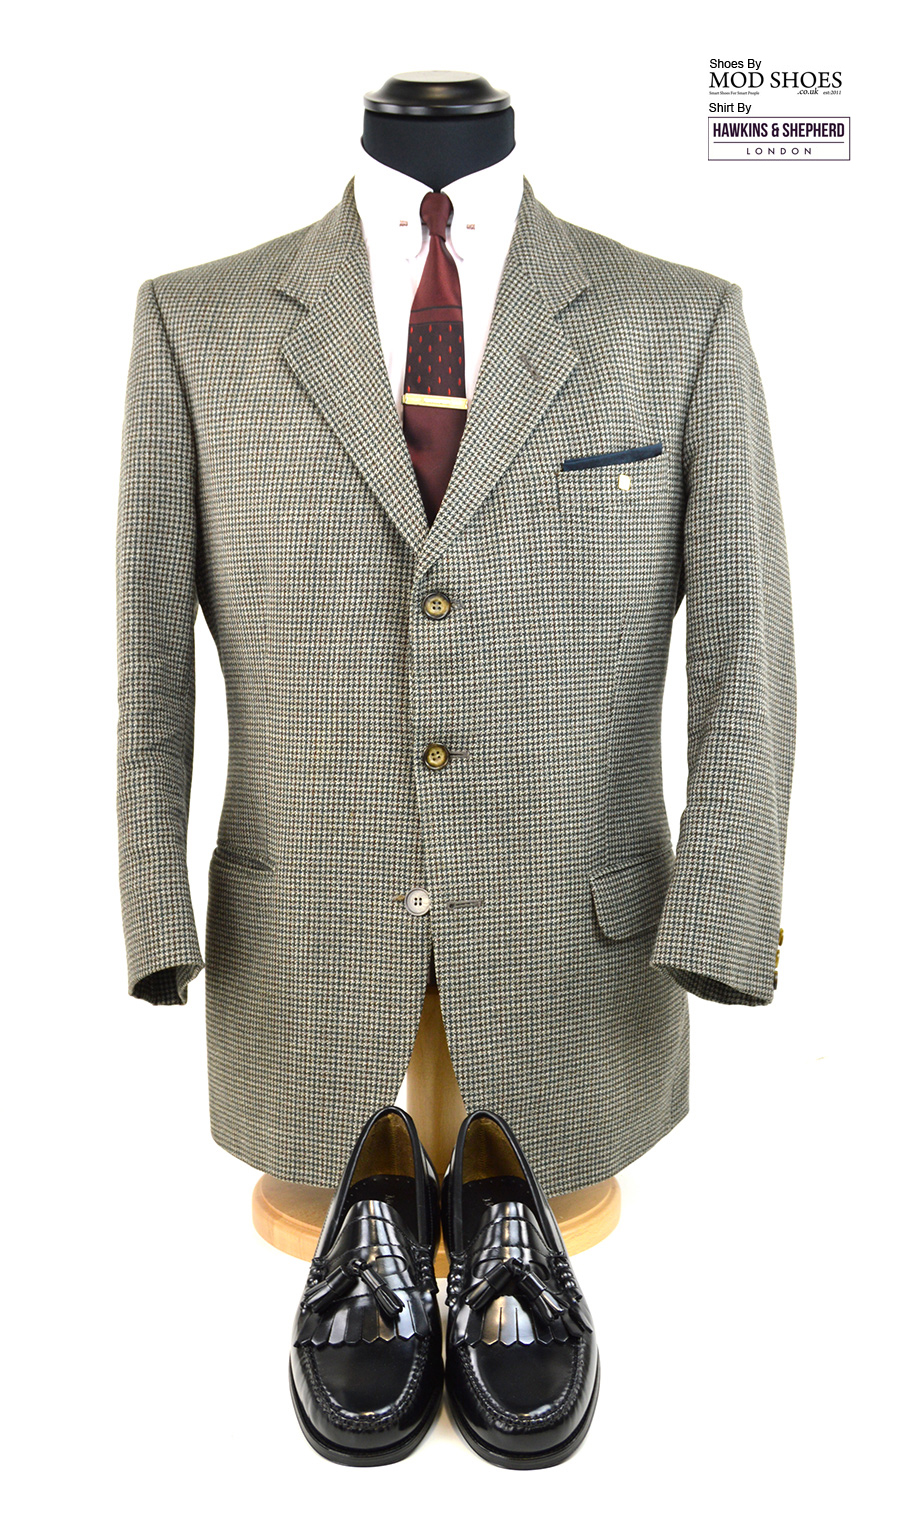 modshoes-penny-loafers-and-mod-jacket-hawkins-and-sherperds-shirt